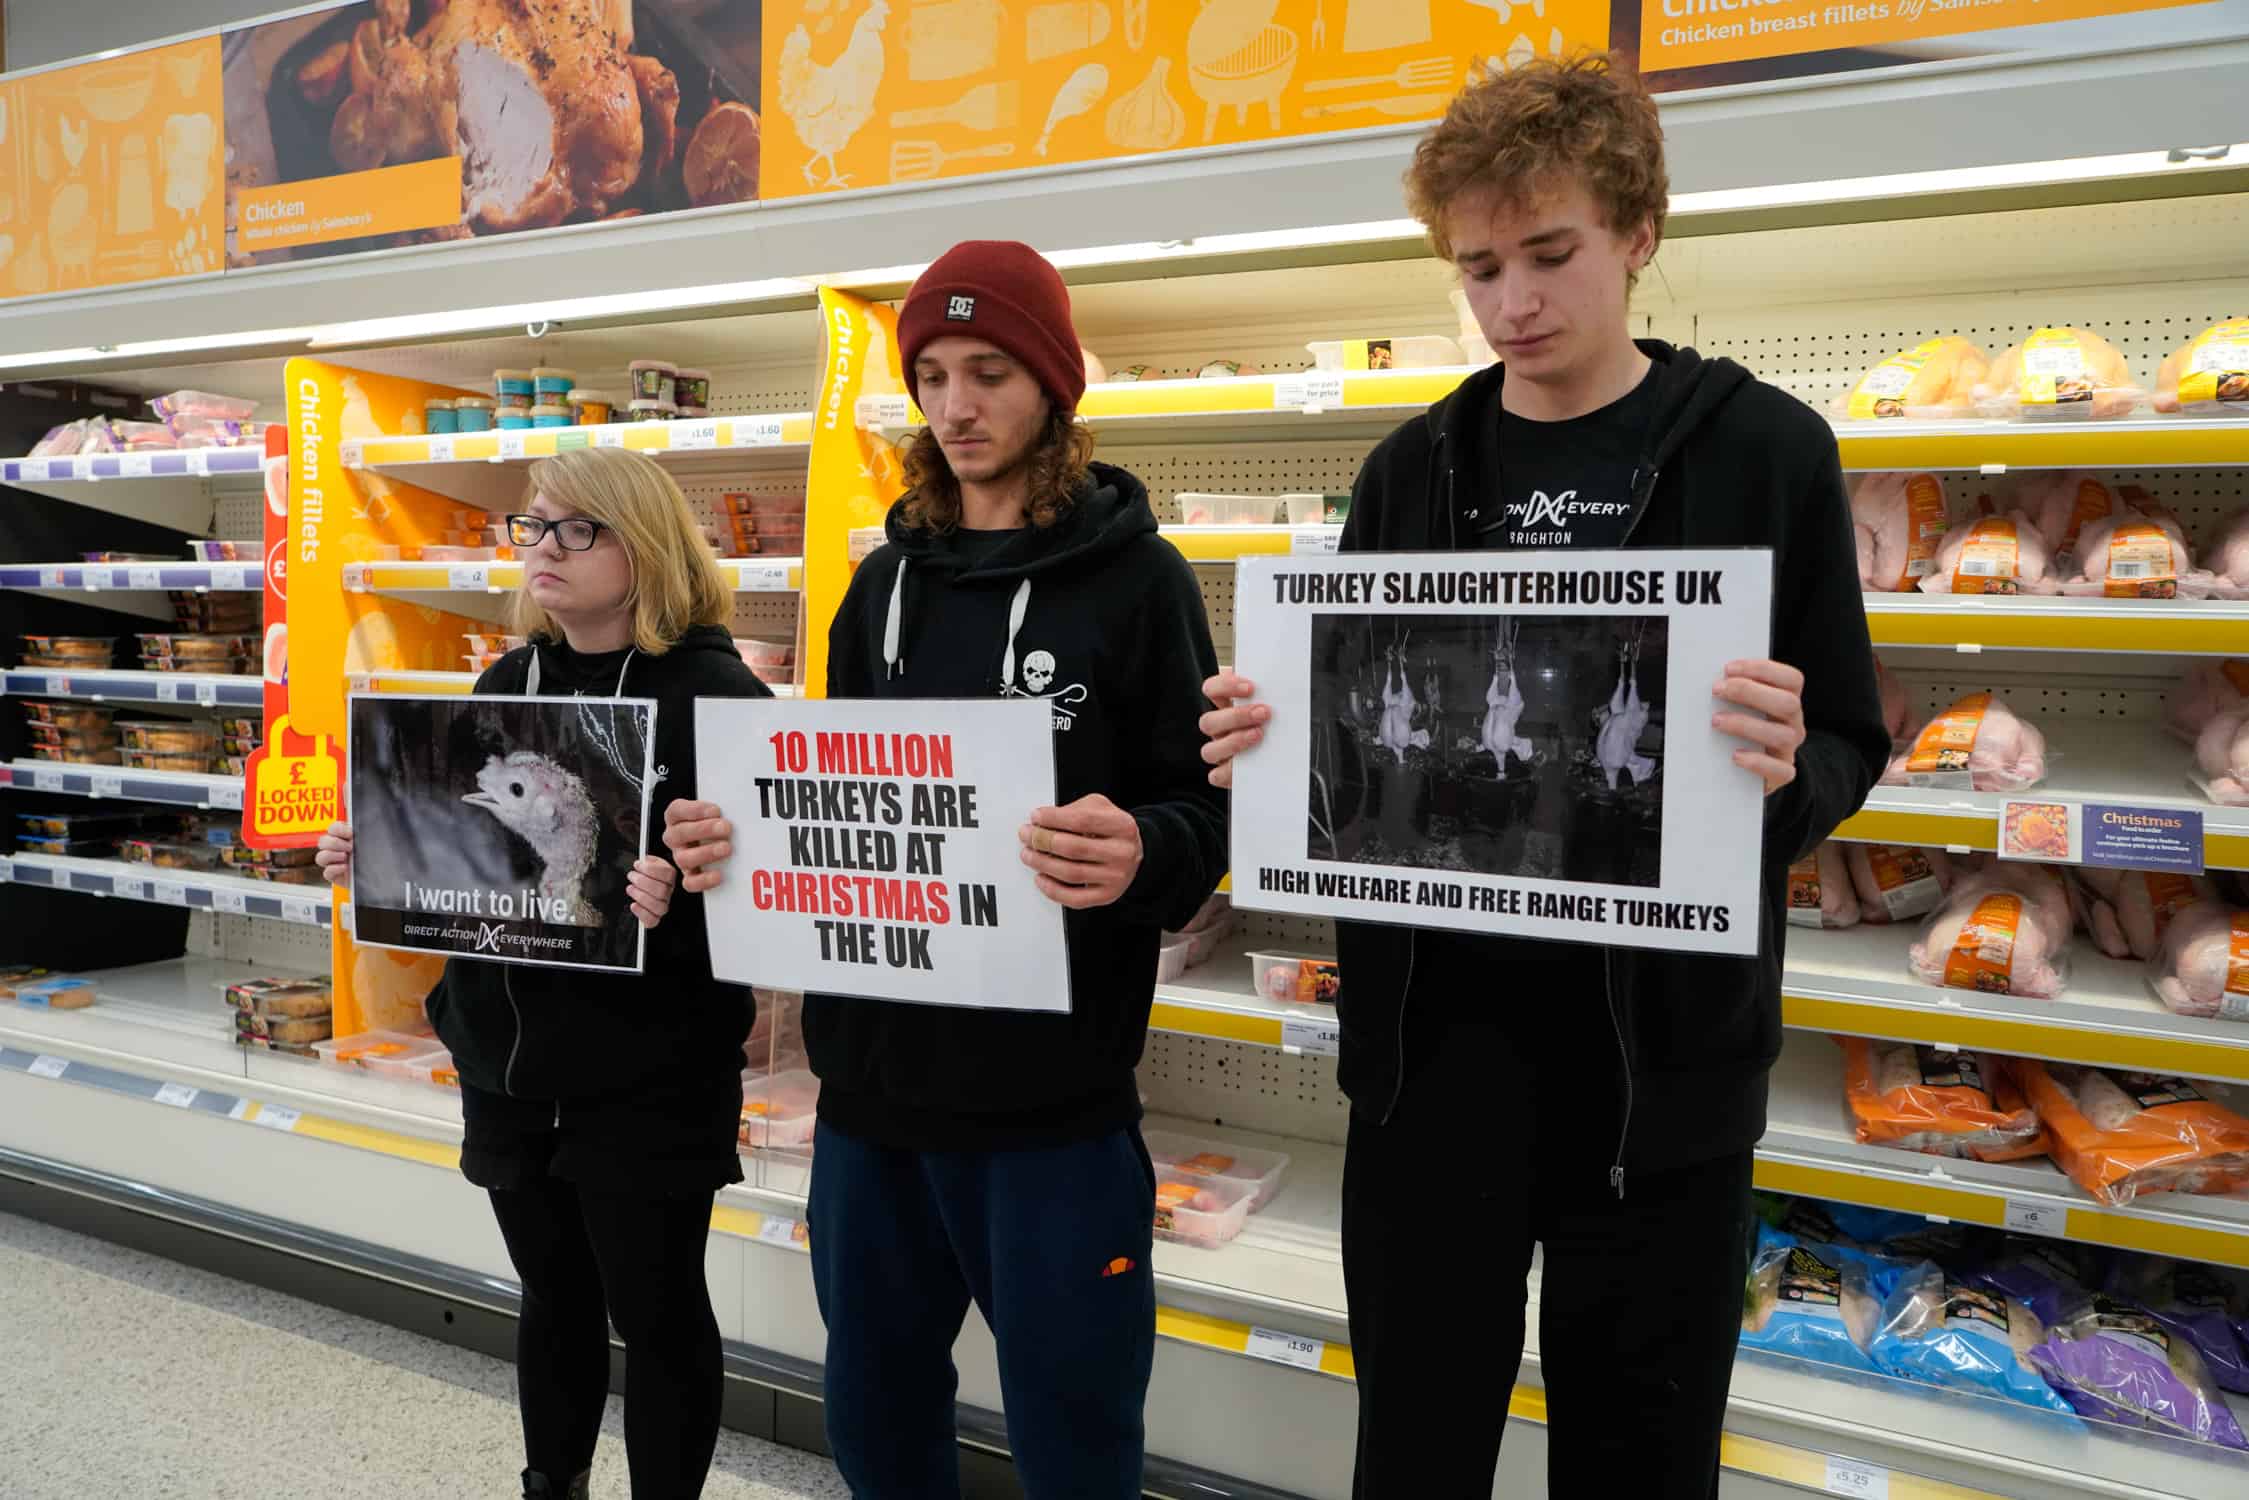 Animal rights group holds turkeys protest in Sainsbury’s